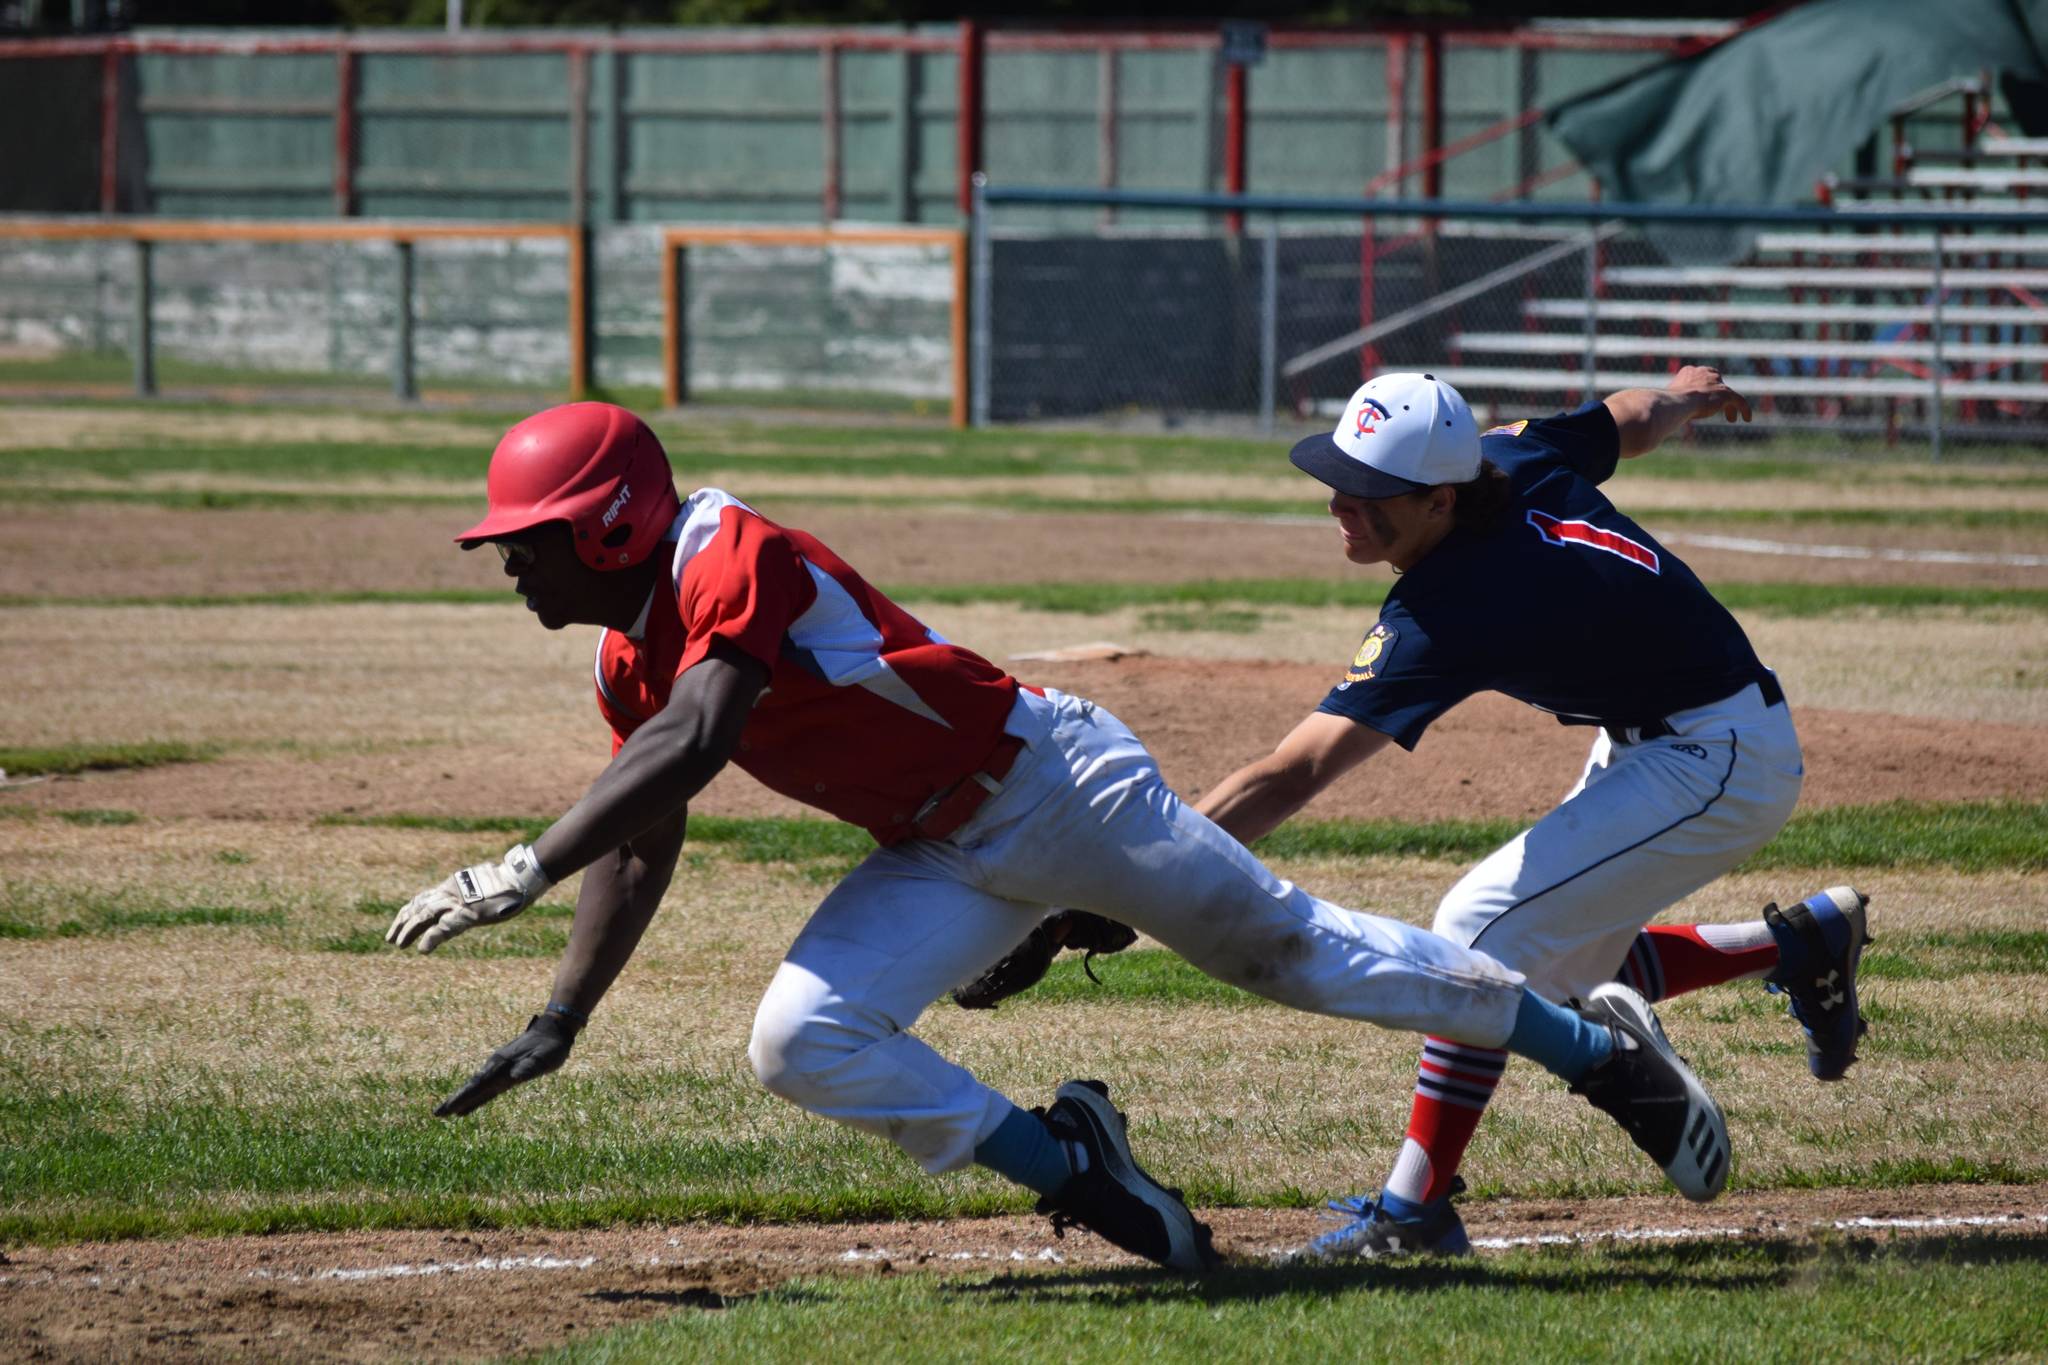 Jacob Belger tags an East Anchorage base runner out in a run-down for the final out of the game at Oiler Park on Sunday, June 13, 2021, securing the first league win for the Kenai Twins. (Camille Botello / Peninsula Clarion)